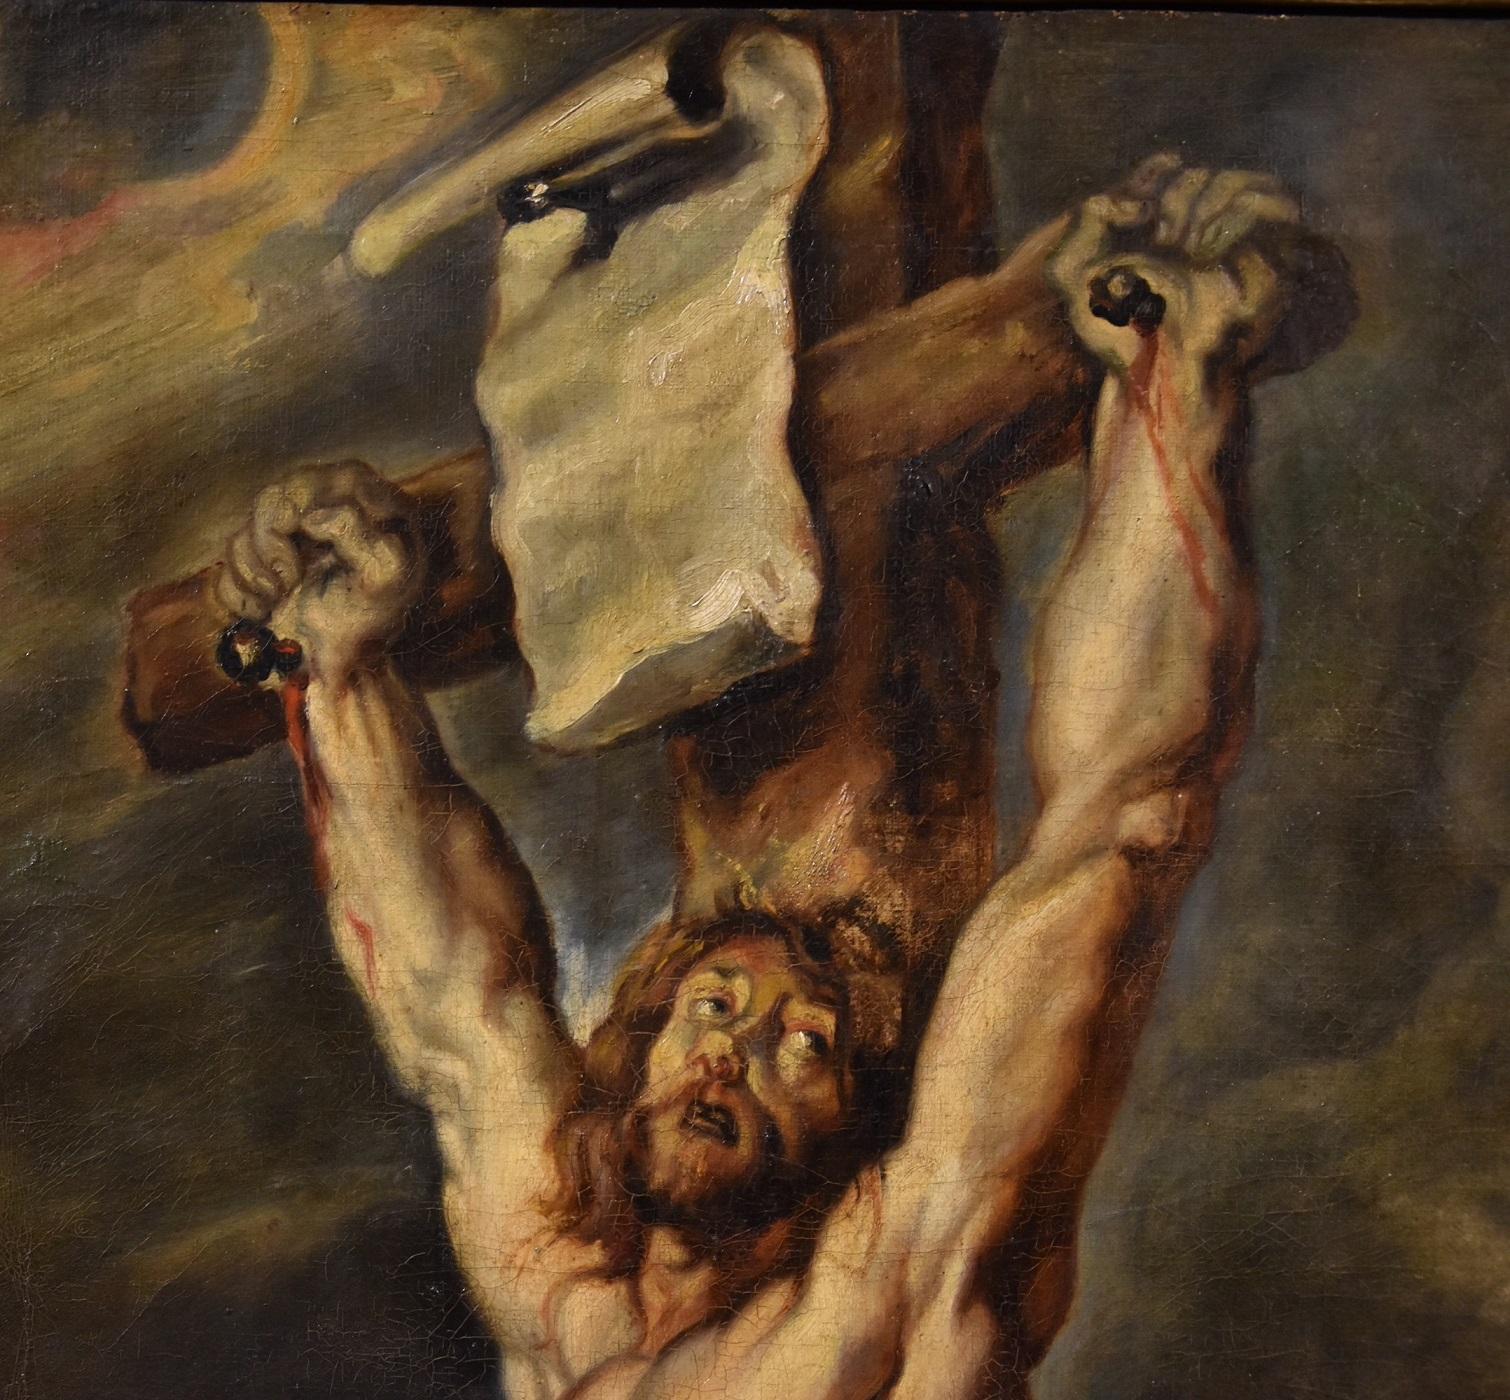 Christ Crucified Rubens Paint Oil on canvas Old master 17th Century Religious For Sale 1